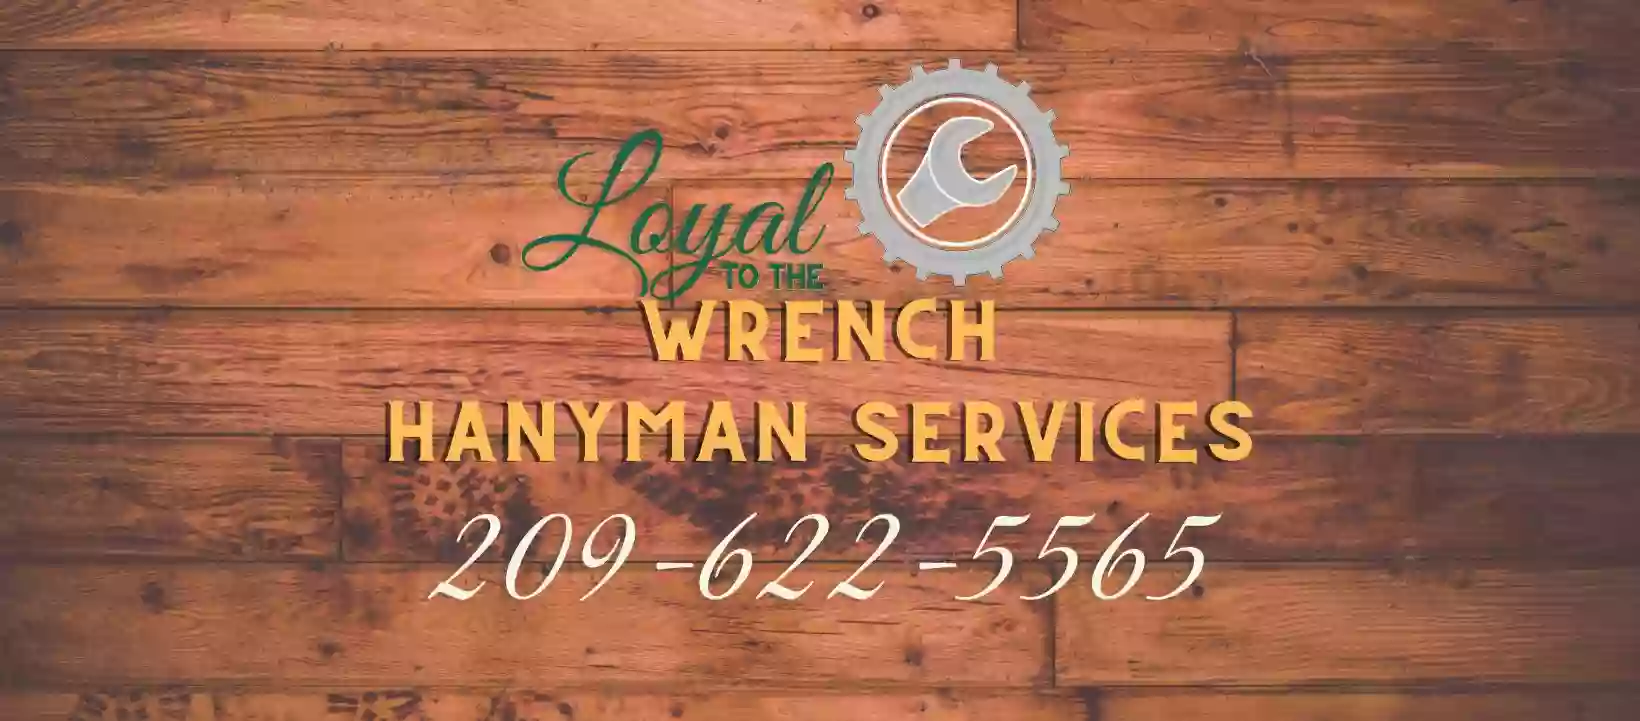 Loyal to the wrench LLC